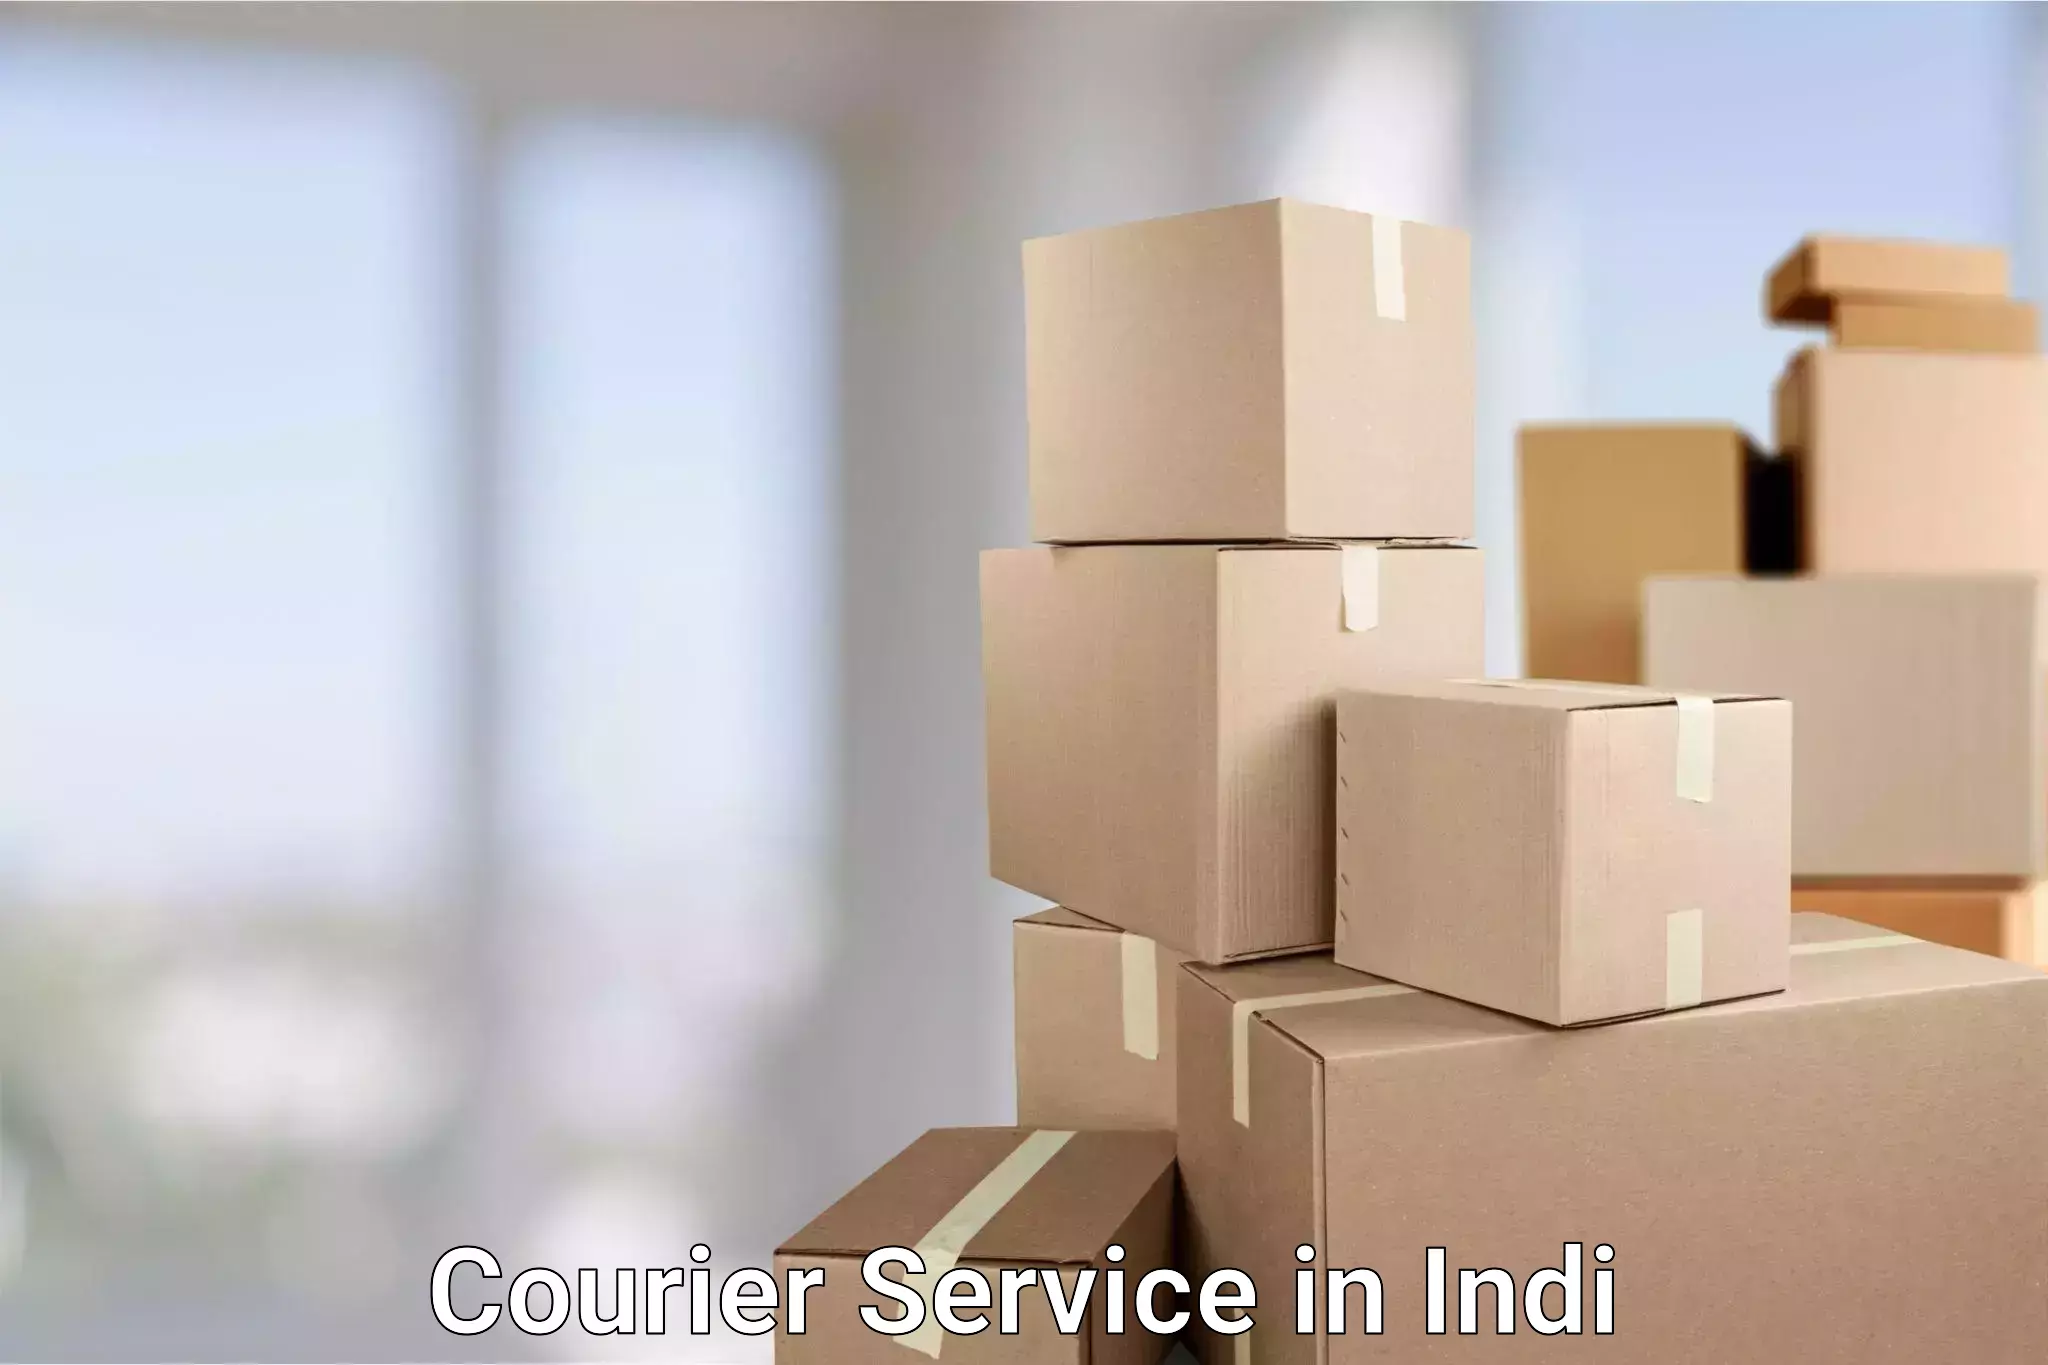 Flexible parcel services in Indi